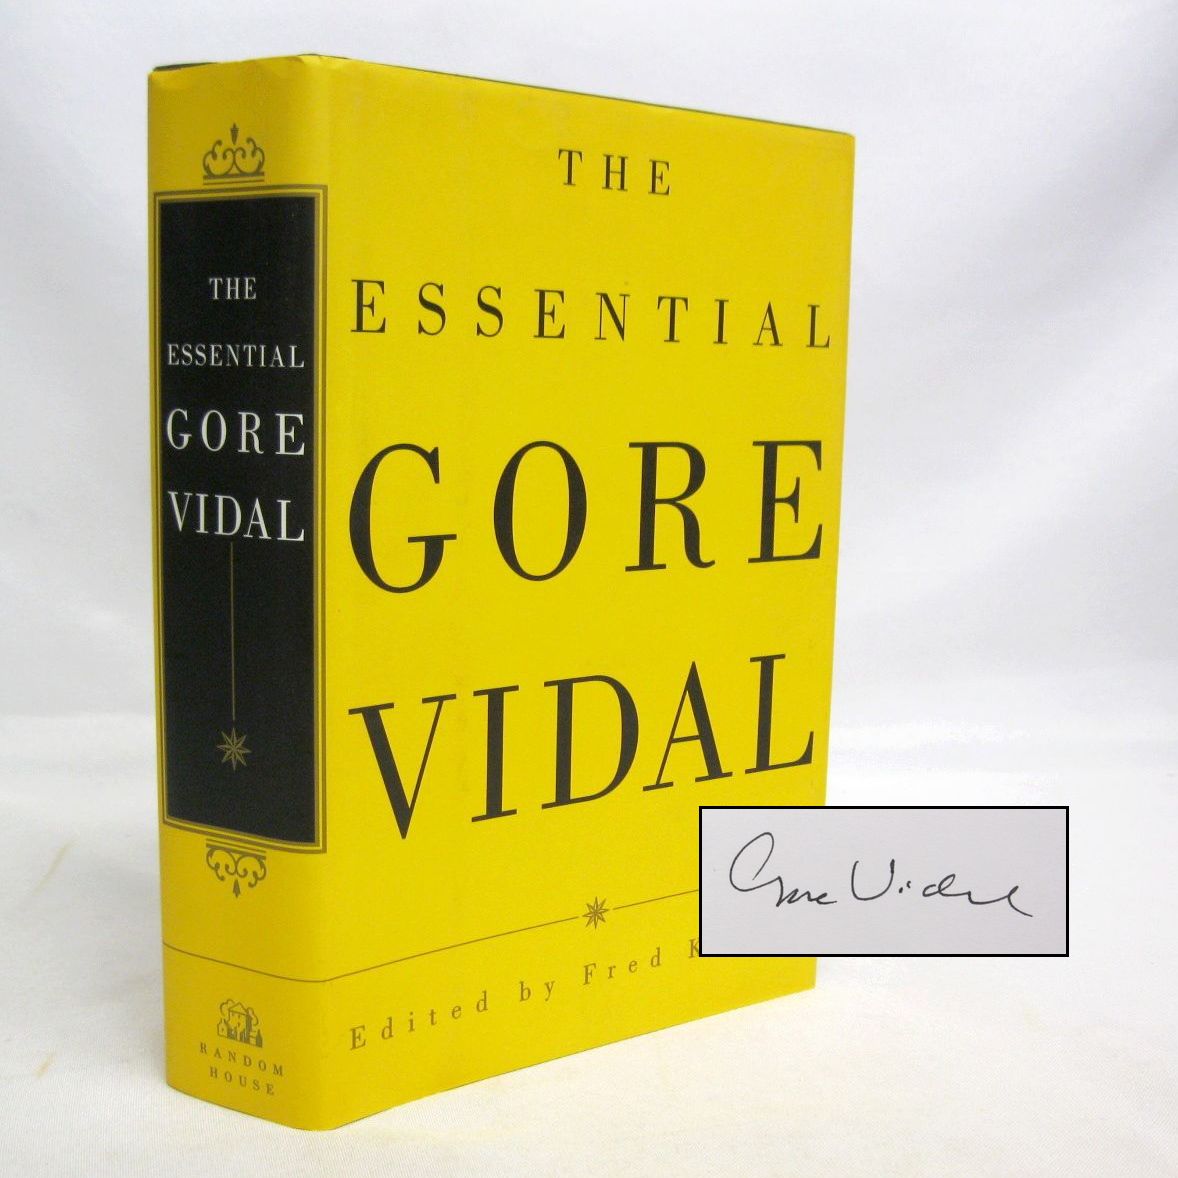 The Essential Gore Vidal edited by Fred Kaplan